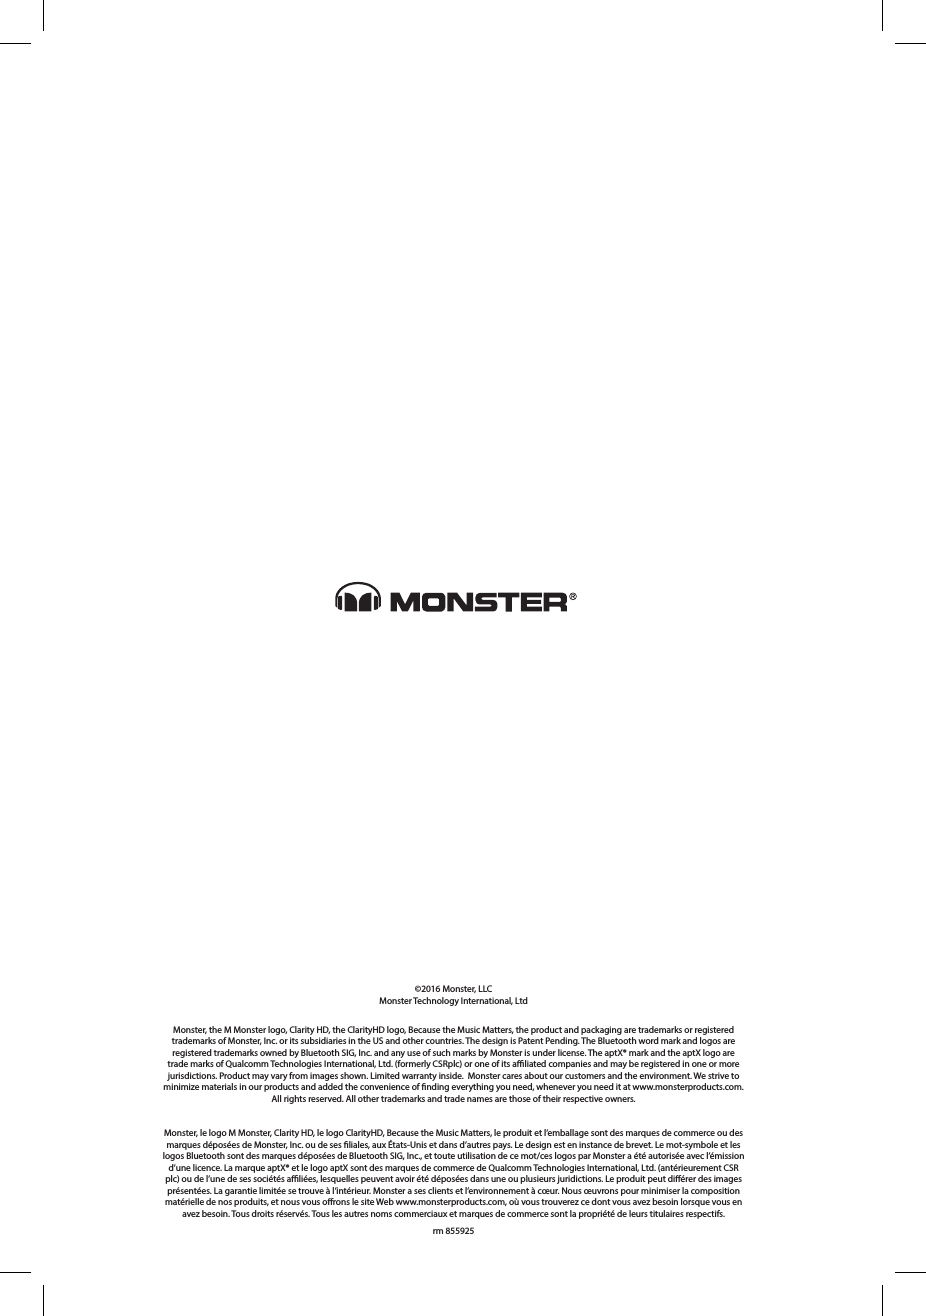 ©2016 Monster, LLCMonster Technology International, Ltd Monster, the M Monster logo, Clarity HD, the ClarityHD logo, Because the Music Matters, the product and packaging are trademarks or registered trademarks of Monster, Inc. or its subsidiaries in the US and other countries. The design is Patent Pending. The Bluetooth word mark and logos are registered trademarks owned by Bluetooth SIG, Inc. and any use of such marks by Monster is under license. The aptX® mark and the aptX logo are trade marks of Qualcomm Technologies International, Ltd. (formerly CSRplc) or one of its aliated companies and may be registered in one or more jurisdictions. Product may vary from images shown. Limited warranty inside.  Monster cares about our customers and the environment. We strive to minimize materials in our products and added the convenience of nding everything you need, whenever you need it at www.monsterproducts.com. All rights reserved. All other trademarks and trade names are those of their respective owners.Monster, le logo M Monster, Clarity HD, le logo ClarityHD, Because the Music Matters, le produit et l’emballage sont des marques de commerce ou des marques déposées de Monster, Inc. ou de ses liales, aux États-Unis et dans d’autres pays. Le design est en instance de brevet. Le mot-symbole et les logos Bluetooth sont des marques déposées de Bluetooth SIG, Inc., et toute utilisation de ce mot/ces logos par Monster a été autorisée avec l’émission d’une licence. La marque aptX® et le logo aptX sont des marques de commerce de Qualcomm Technologies International, Ltd. (antérieurement CSR plc) ou de l’une de ses sociétés aliées, lesquelles peuvent avoir été déposées dans une ou plusieurs juridictions. Le produit peut diérer des images présentées. La garantie limitée se trouve à l’intérieur. Monster a ses clients et l’environnement à cœur. Nous œuvrons pour minimiser la composition matérielle de nos produits, et nous vous orons le site Web www.monsterproducts.com, où vous trouverez ce dont vous avez besoin lorsque vous en avez besoin. Tous droits réservés. Tous les autres noms commerciaux et marques de commerce sont la propriété de leurs titulaires respectifs.rm 855925